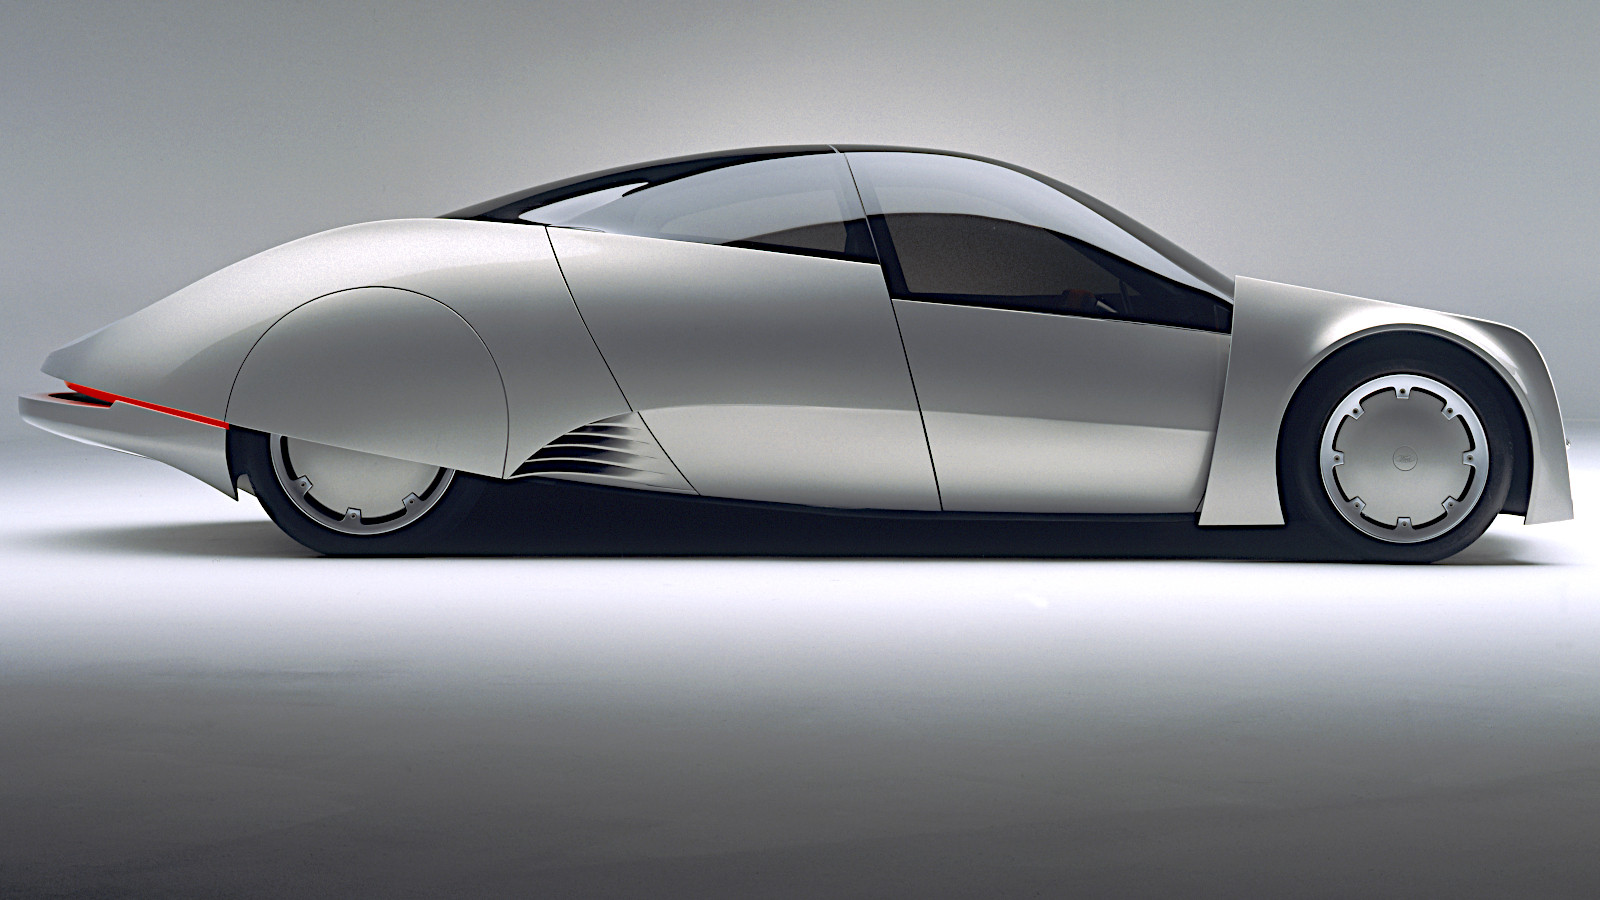 Ford 021C Concept Car from late 1990s by Marc Newson.